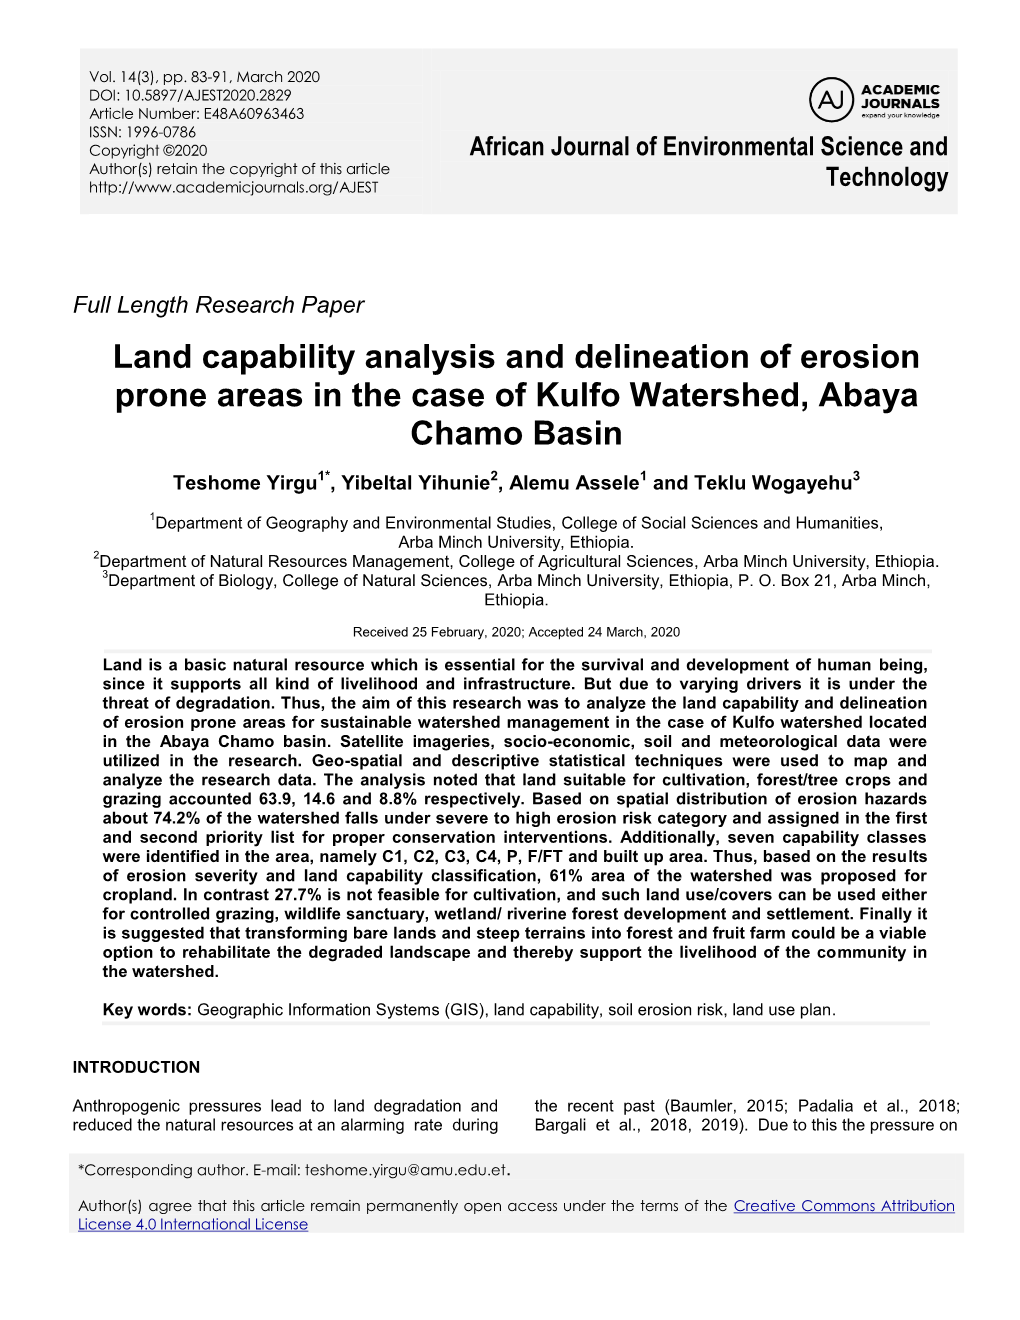 Land Capability Analysis and Delineation of Erosion Prone Areas in the Case of Kulfo Watershed, Abaya Chamo Basin